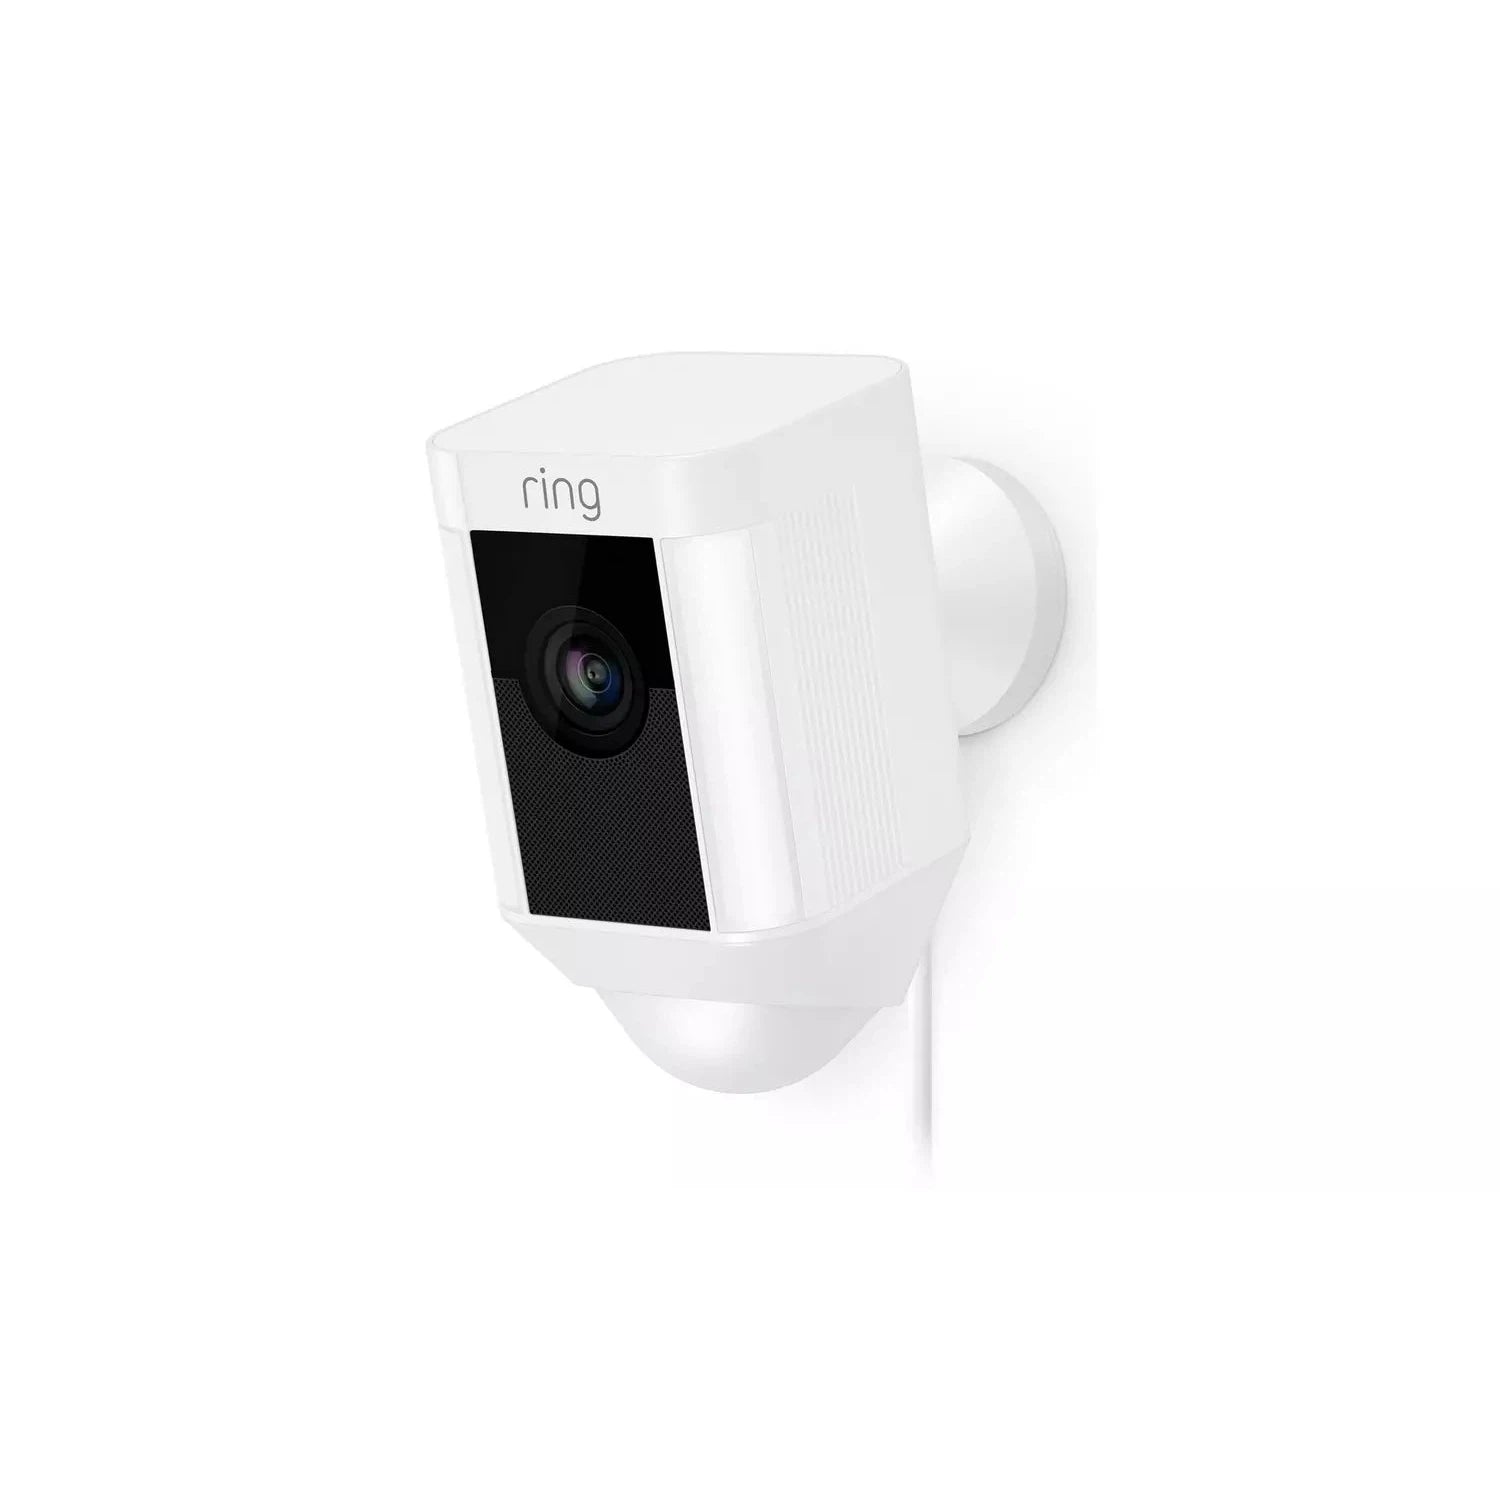 Ring Spotlight Cam Wired Security Camera - White - Refurbished Excellent